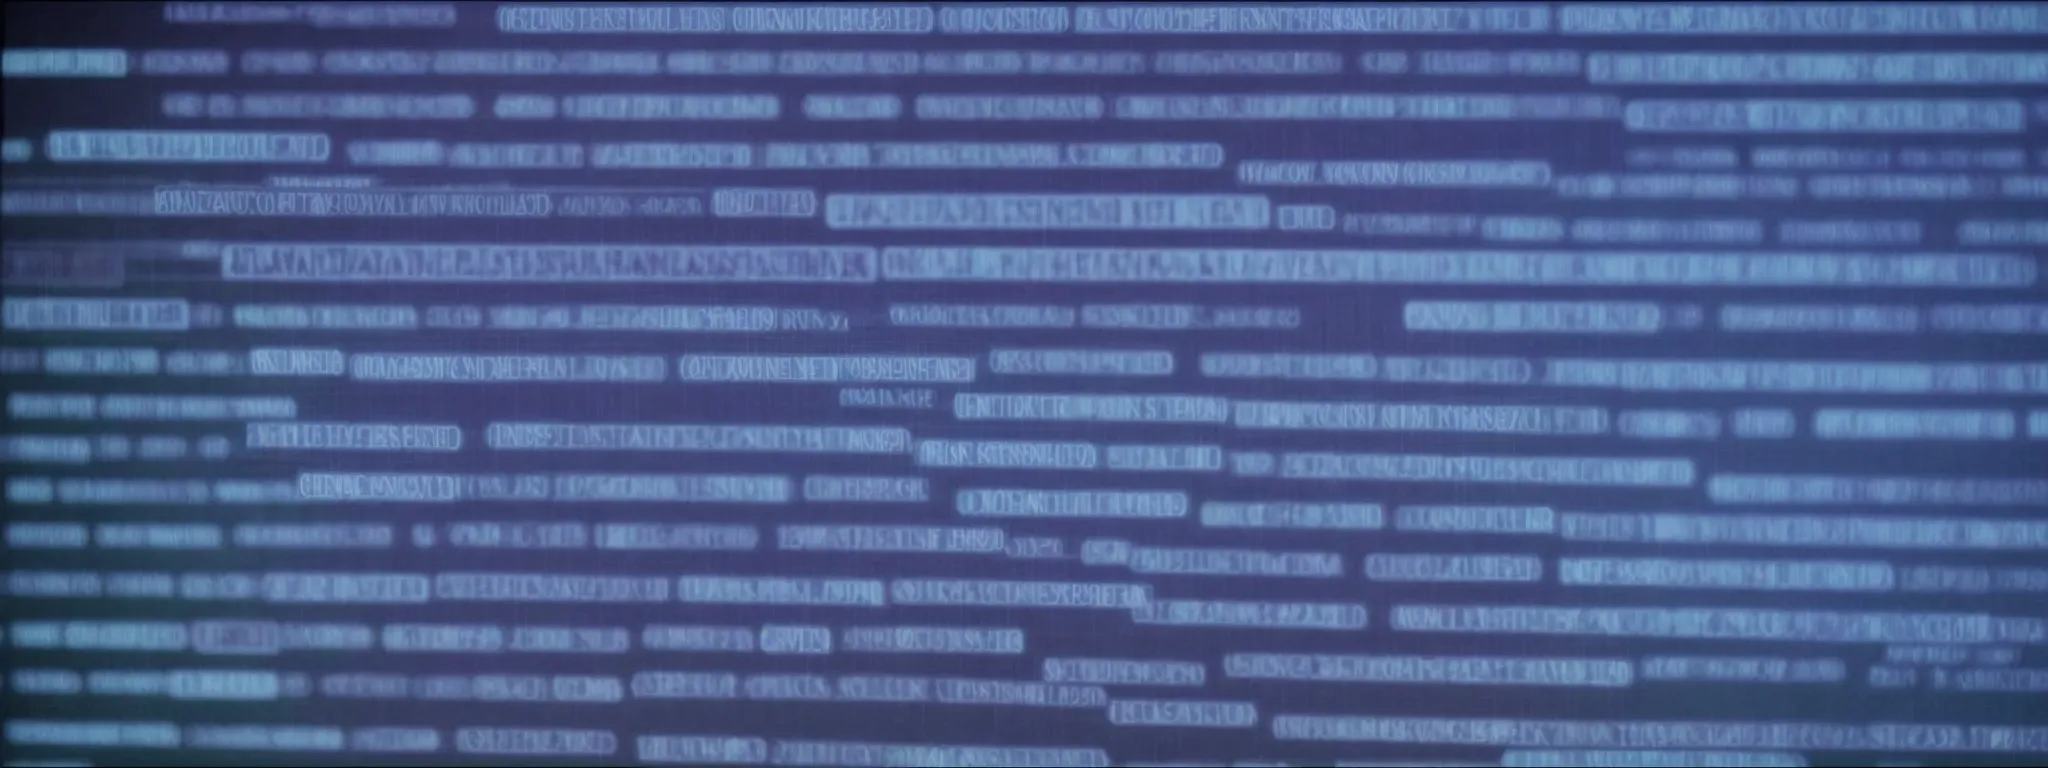 a computer screen displaying a list of organized keywords with an abstract background symbolizing digital data analysis.